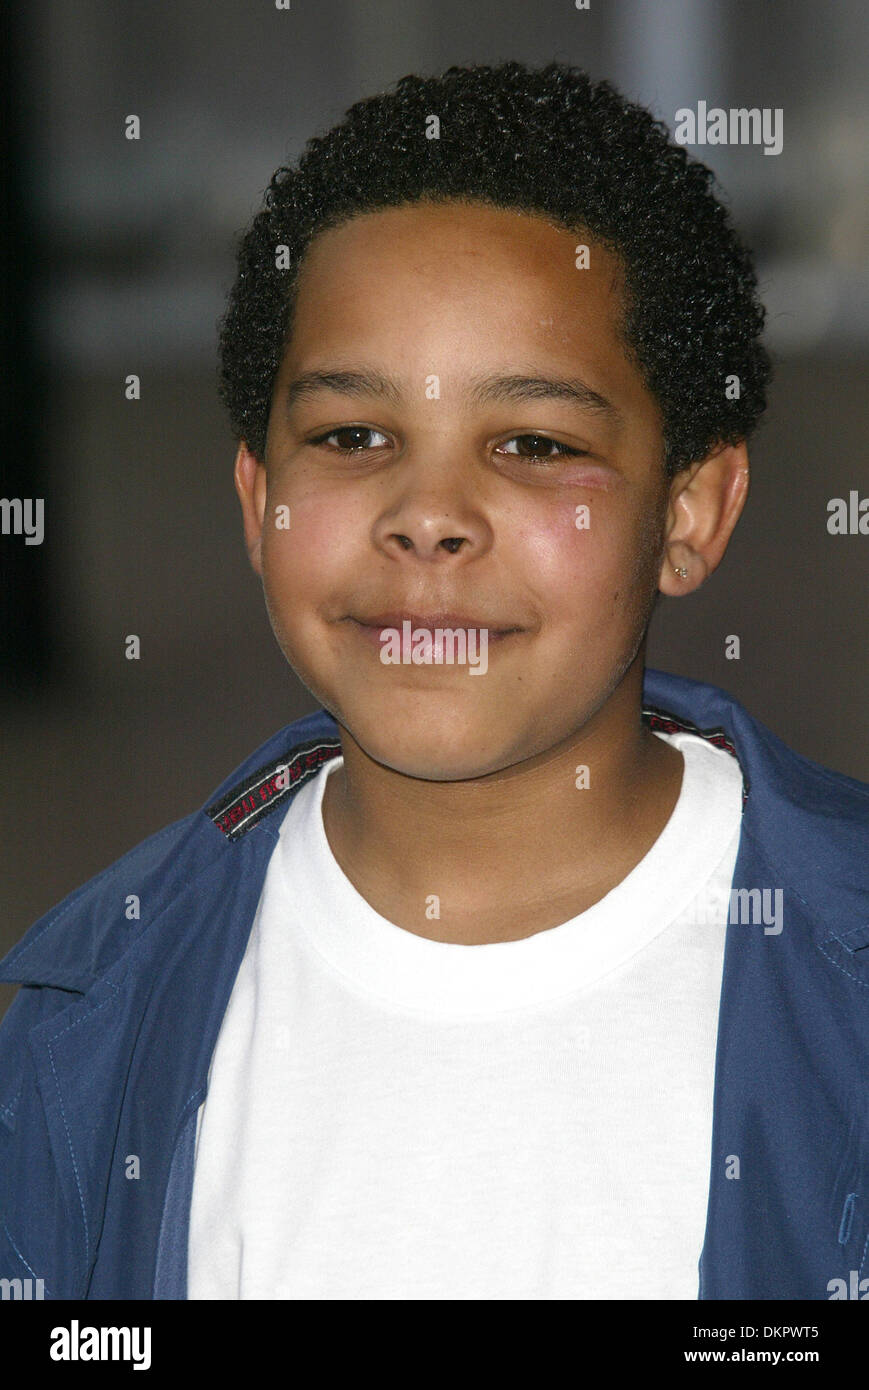 OMERO MUMBA.ACTOR & BROTHER OF SAMANTHA.ONDON, ENGL.THE ODEON, LEICESTER SQUARE, L.26/06/2002.DI2889. Stock Photo